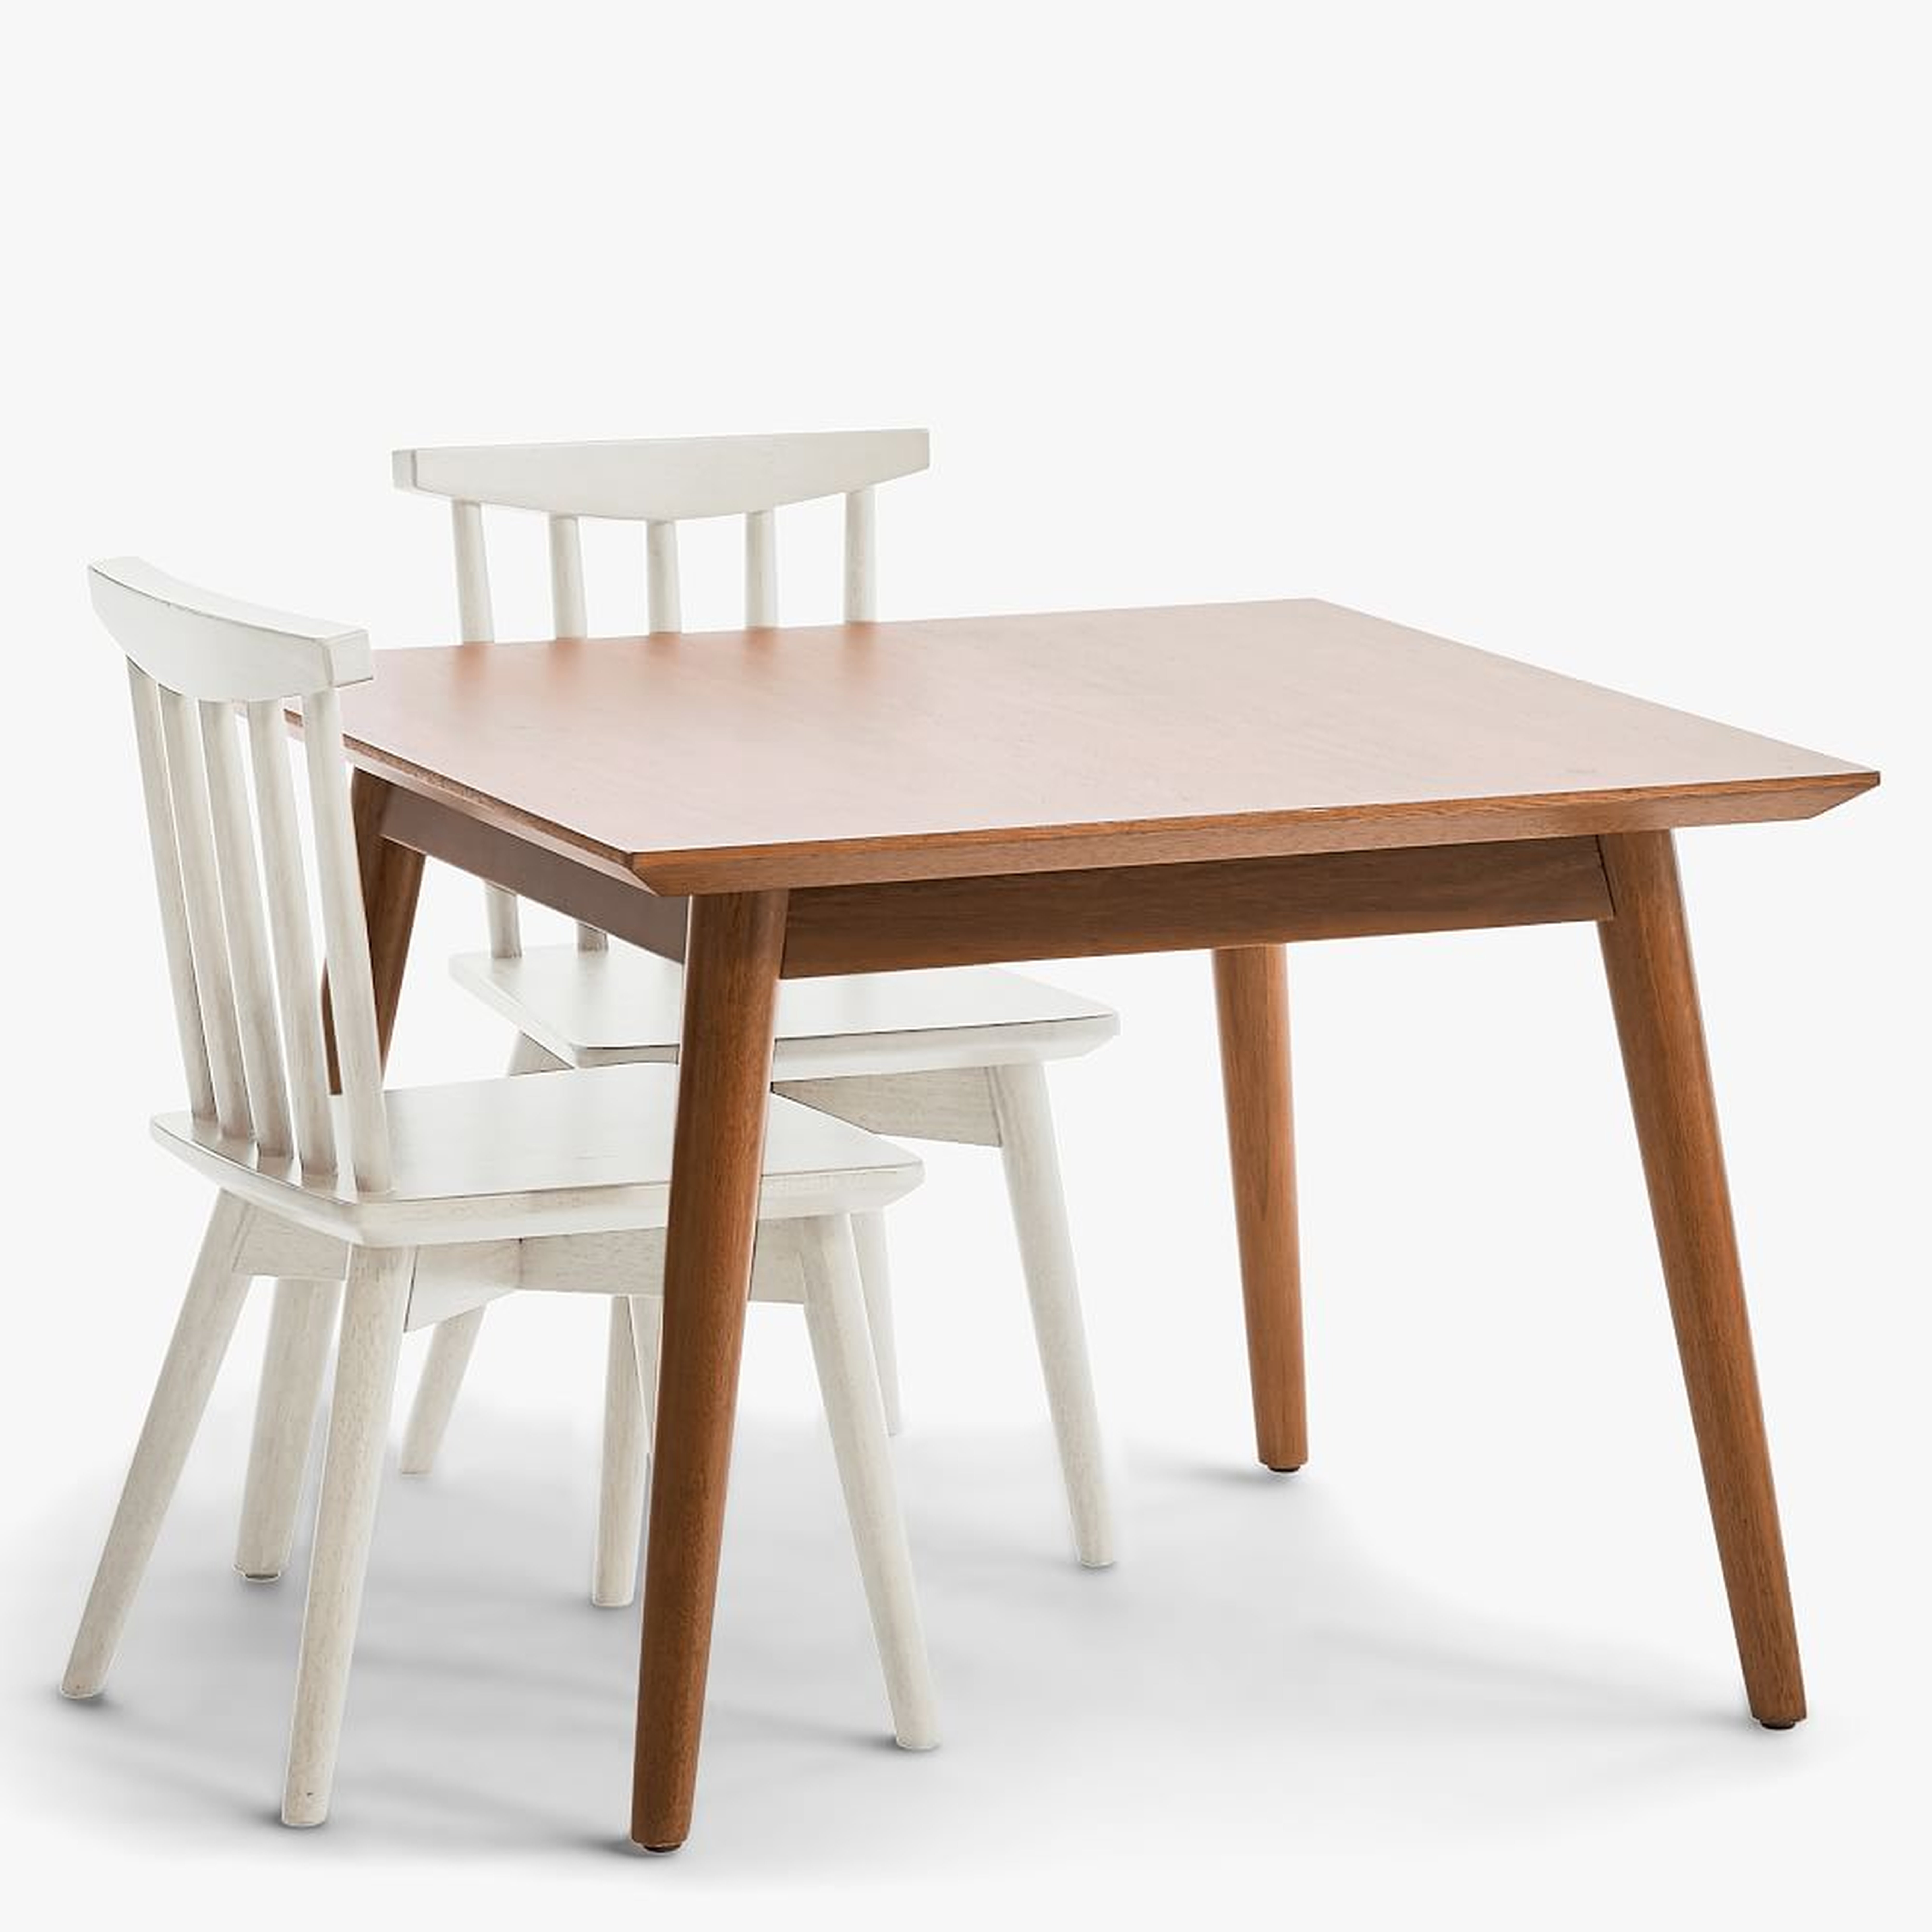 Mid-Century My 1st Table & Set of 2 Chairs, Acorn Table, White Chairs, WE Kids - West Elm